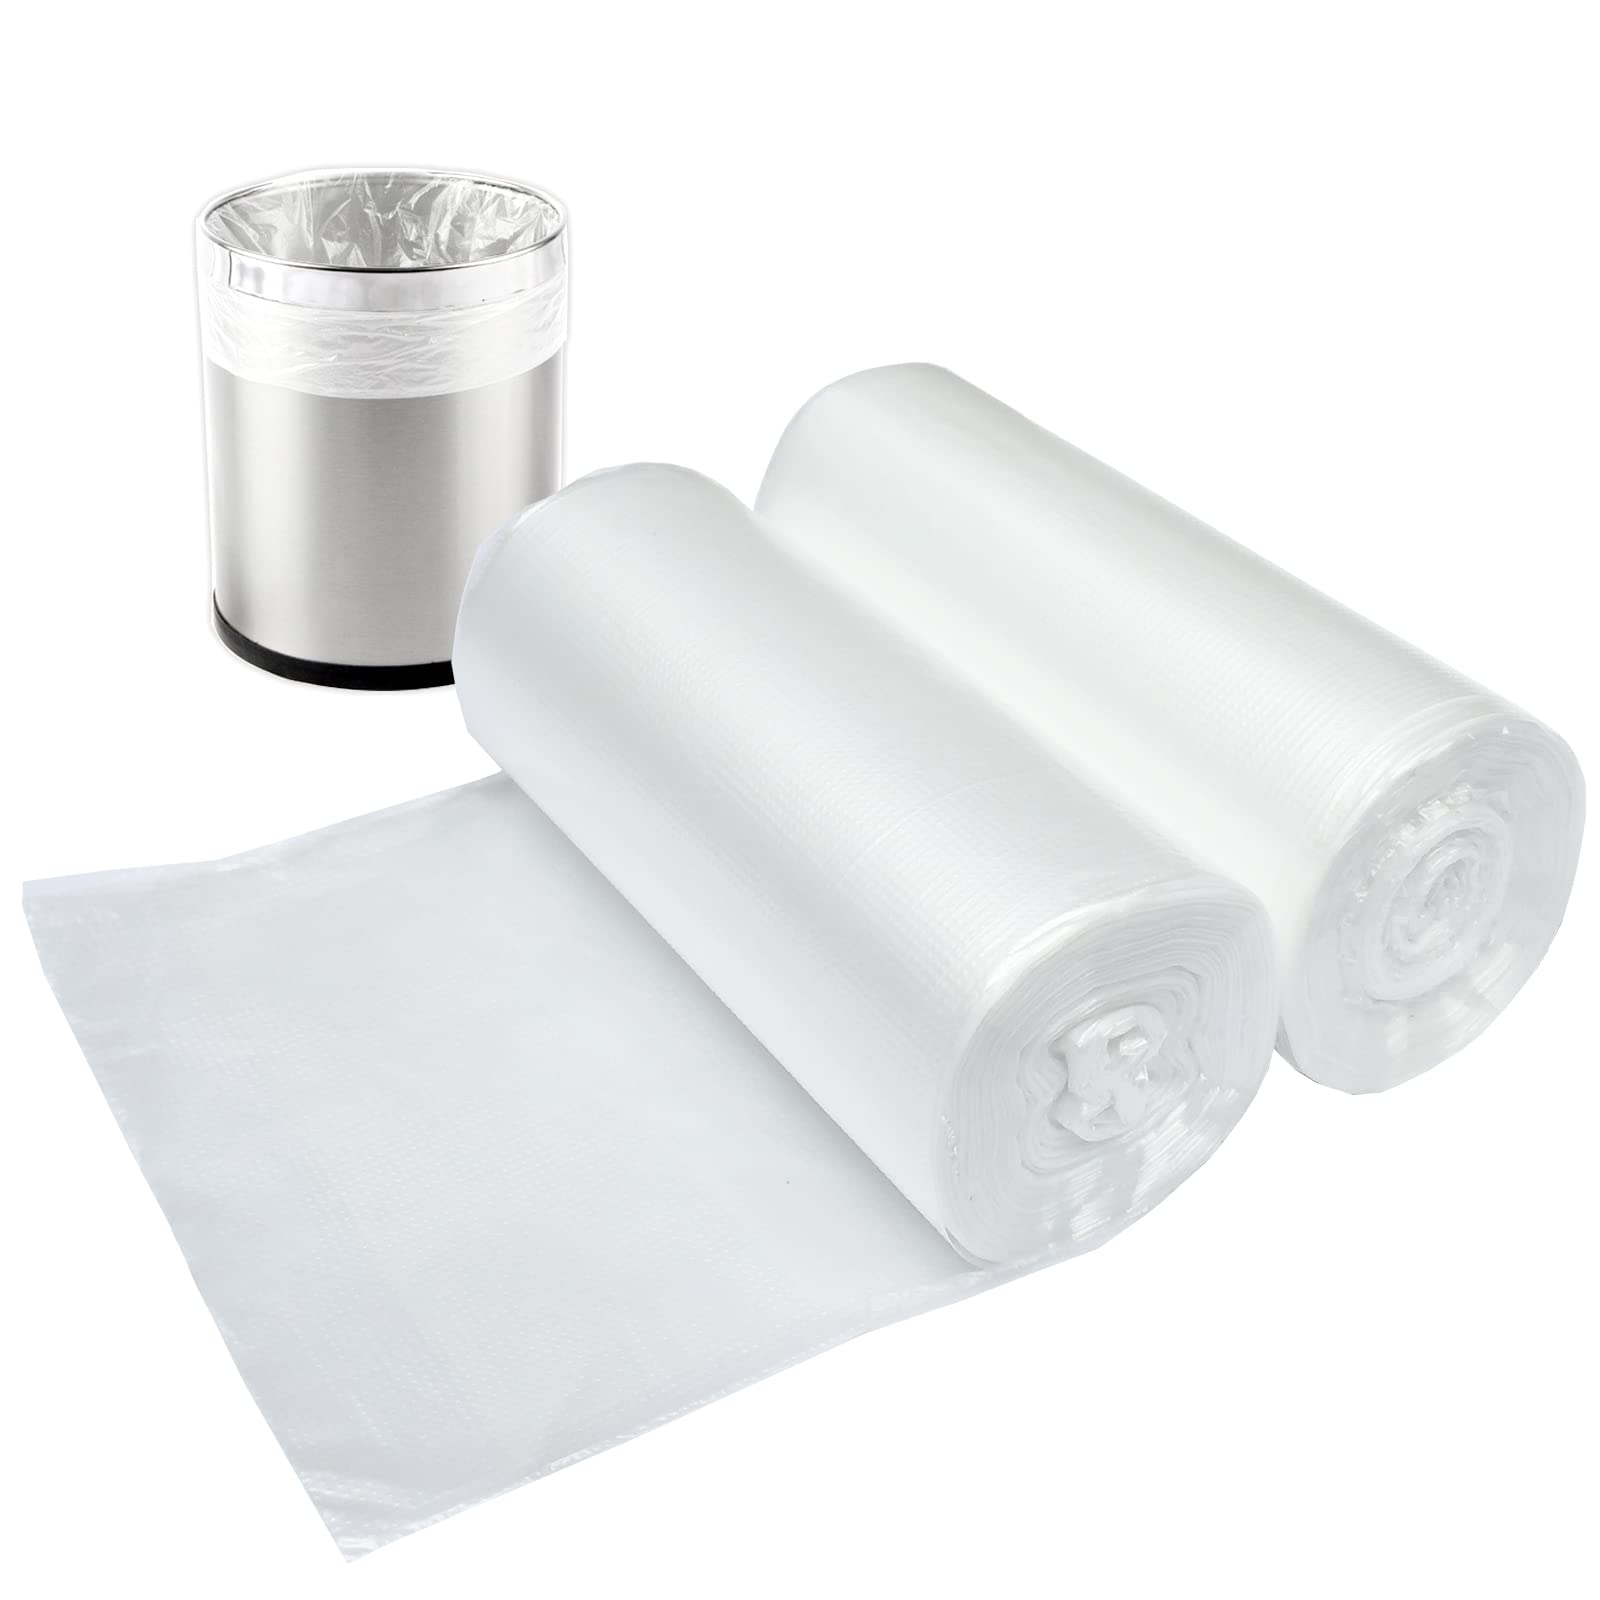 3 Gallon Small Clear Bathroom Trash Bags, Office Wastebasket Liners Garbage  Bags for Restroom, Home Bins